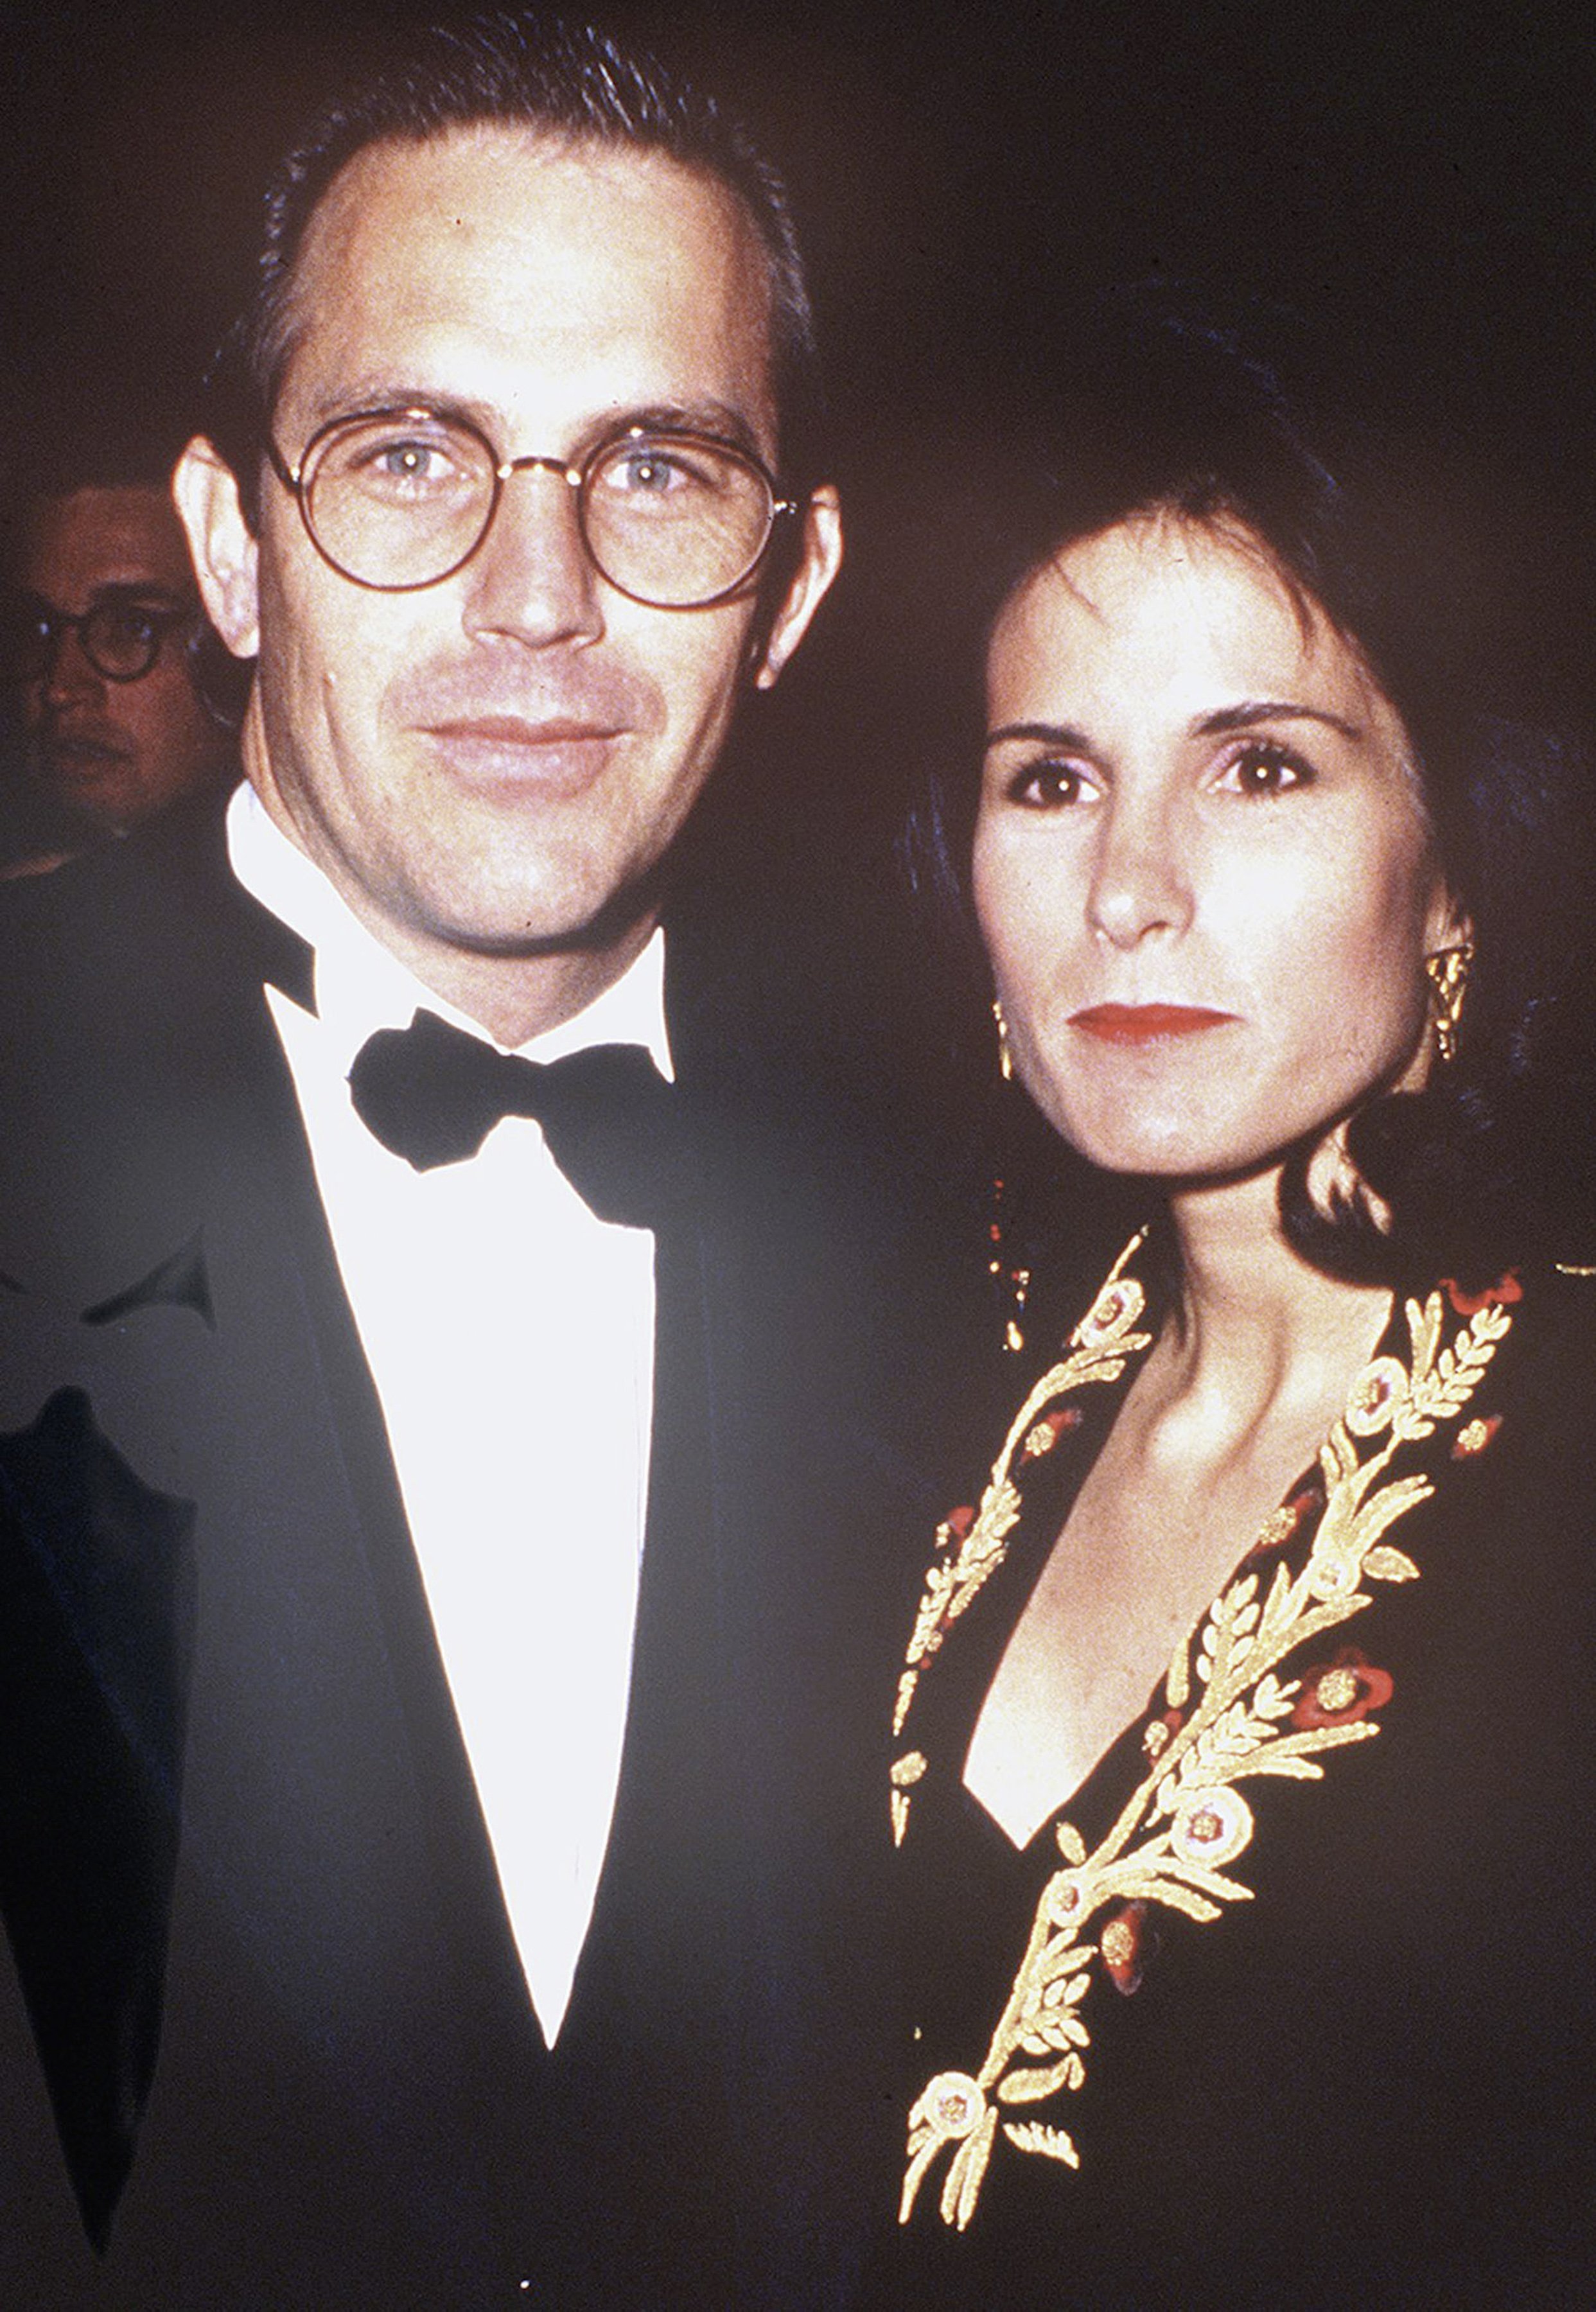 American actress Cindy Costner and American actor, director, producer, and musician Kevin Costner attend the 'Dances With Wolves' Los Angeles Premiere at Cineplex Odeon Cinema in Los Angeles, California, US, 4th November 1990. | Source: Getty Images